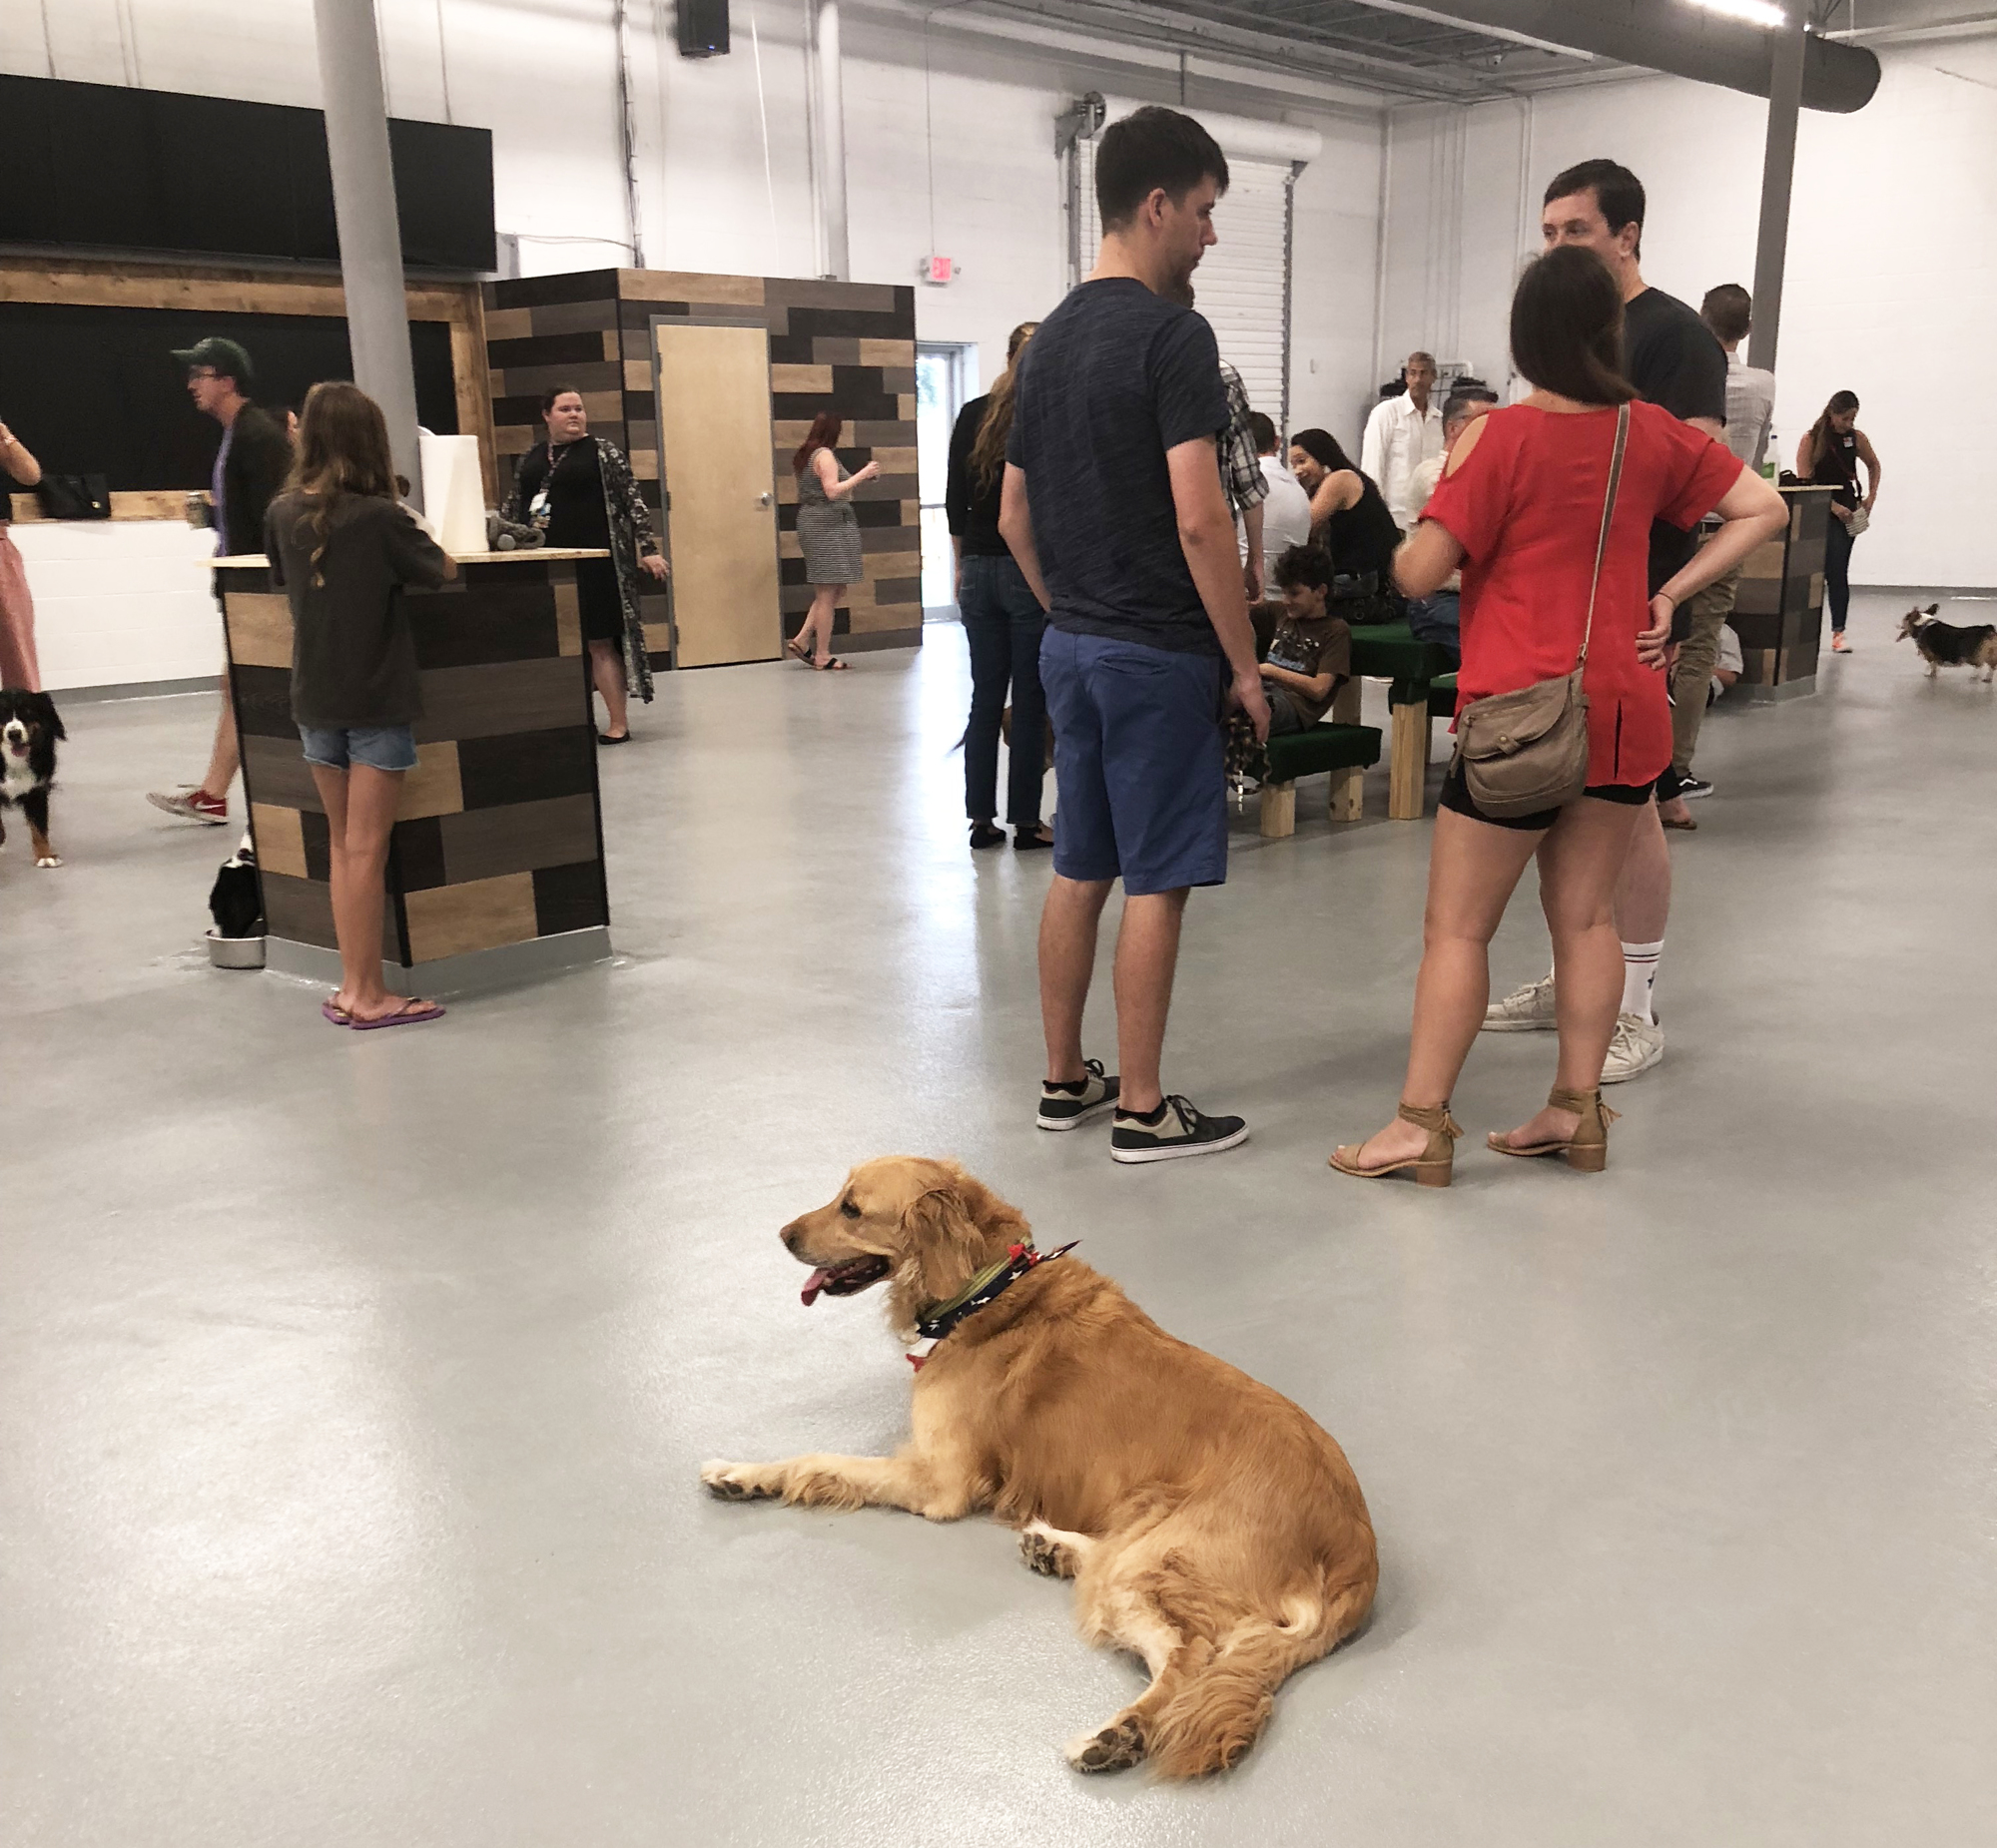 The indoor dog park at Kanine Social offers a space where pets and their owners can mingle even if it’s raining.